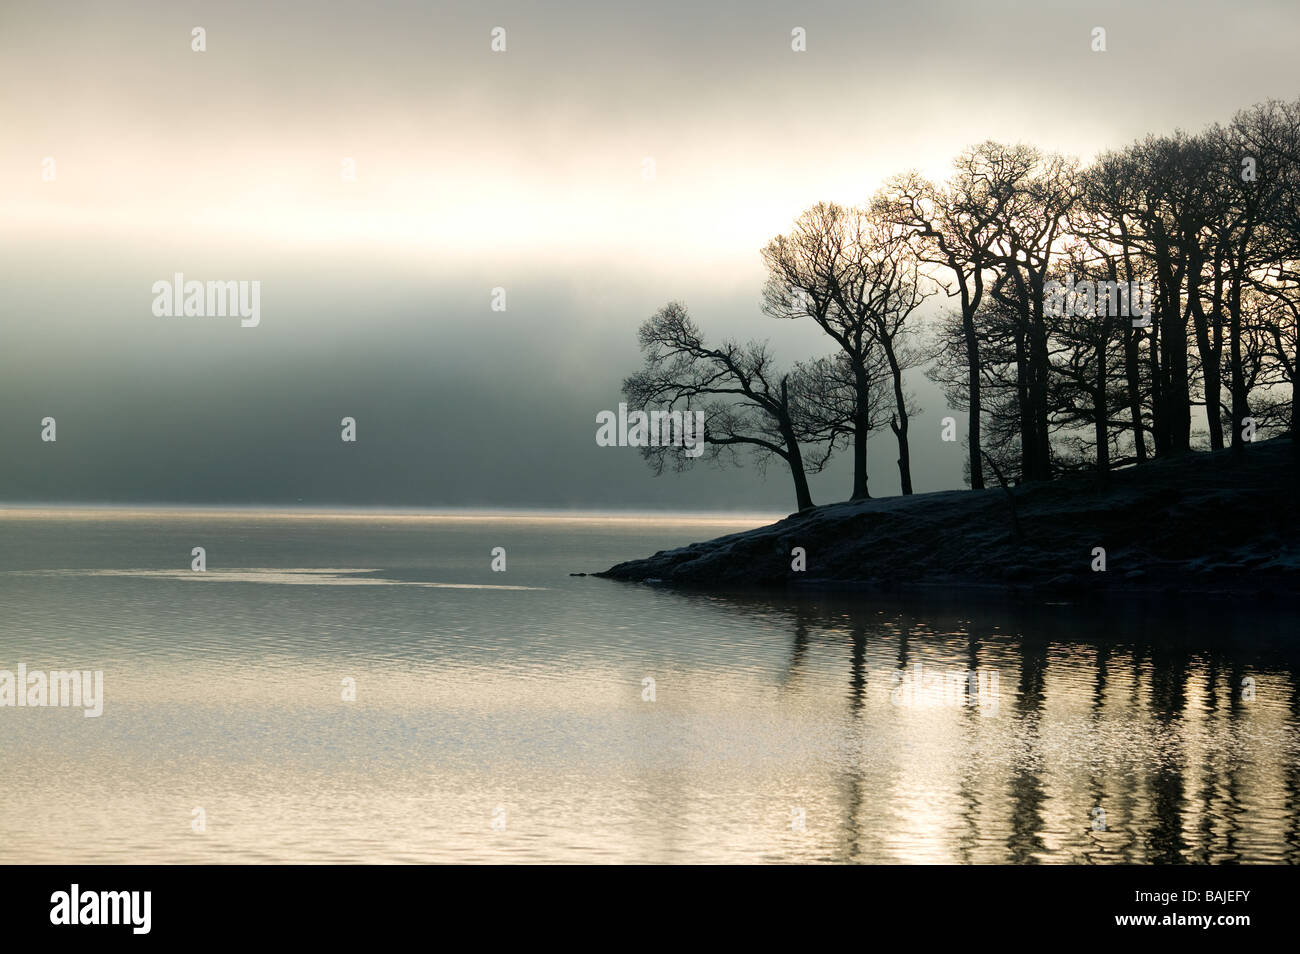 trees on the lake edge silhouetted against sun breaking through a morning mist on Derwent water in the Lake District Stock Photo